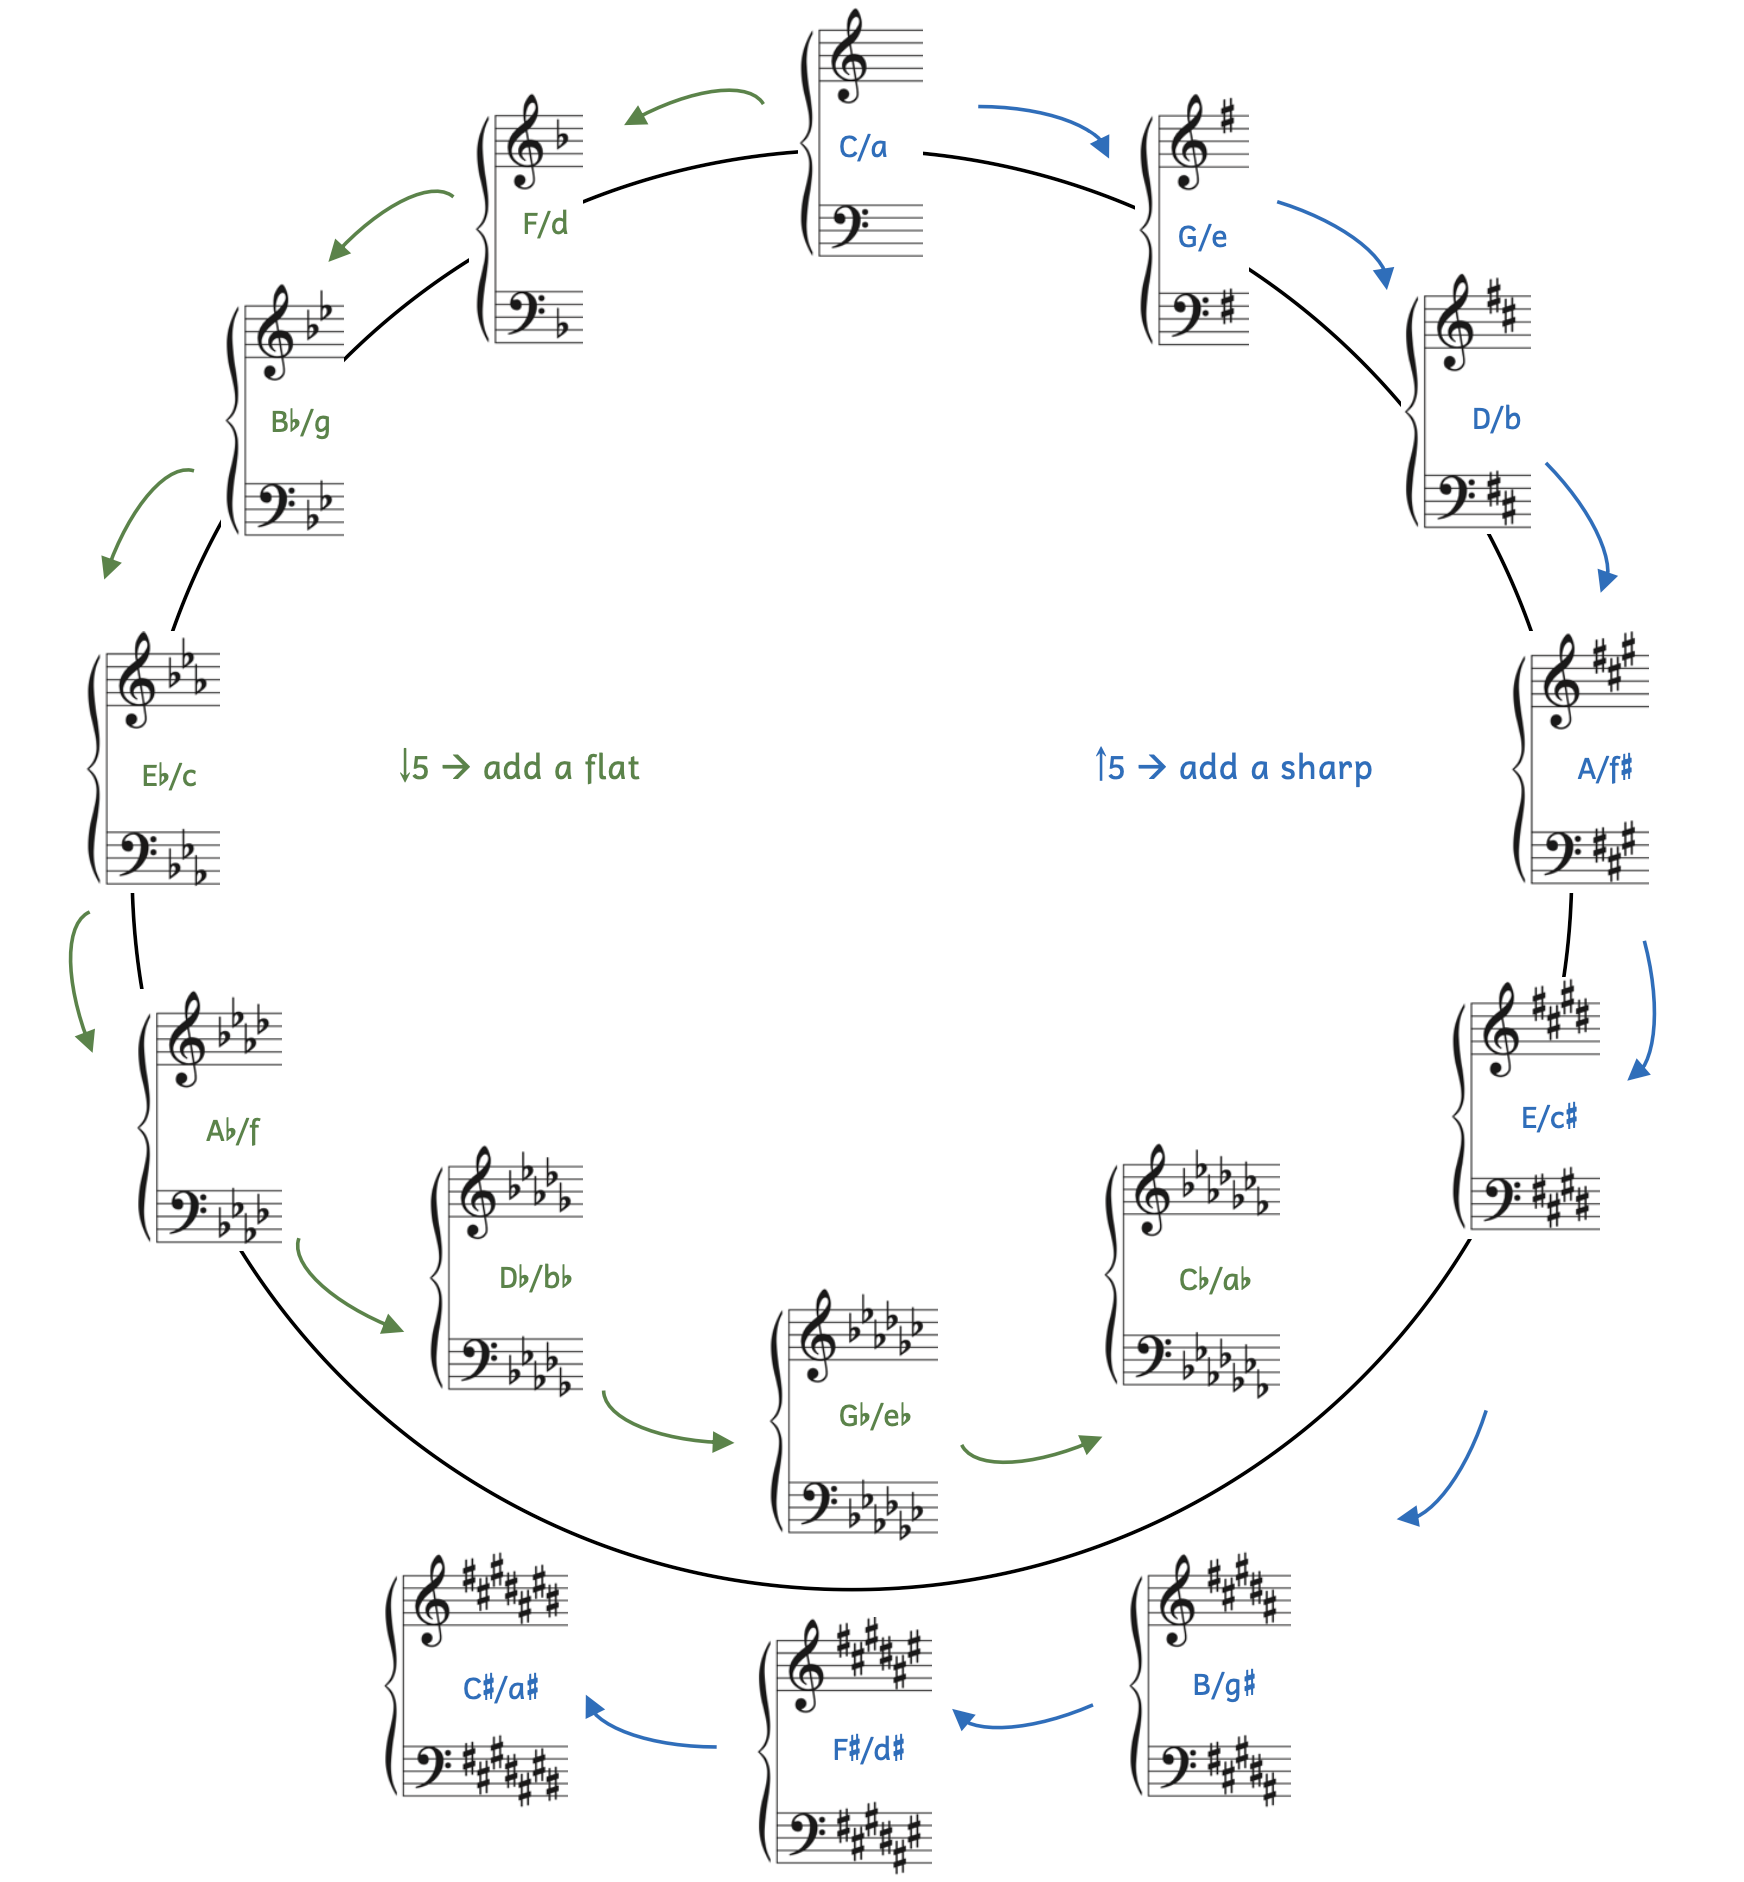 Diagram of the circle of fifths, which shows all the key signatures of major and minor keys. When moving clockwise from C, each key is a fifth higher and each key signature adds a sharp. When moving counterclockwise from C, each key is a fifth lower and each key signature adds a flat.